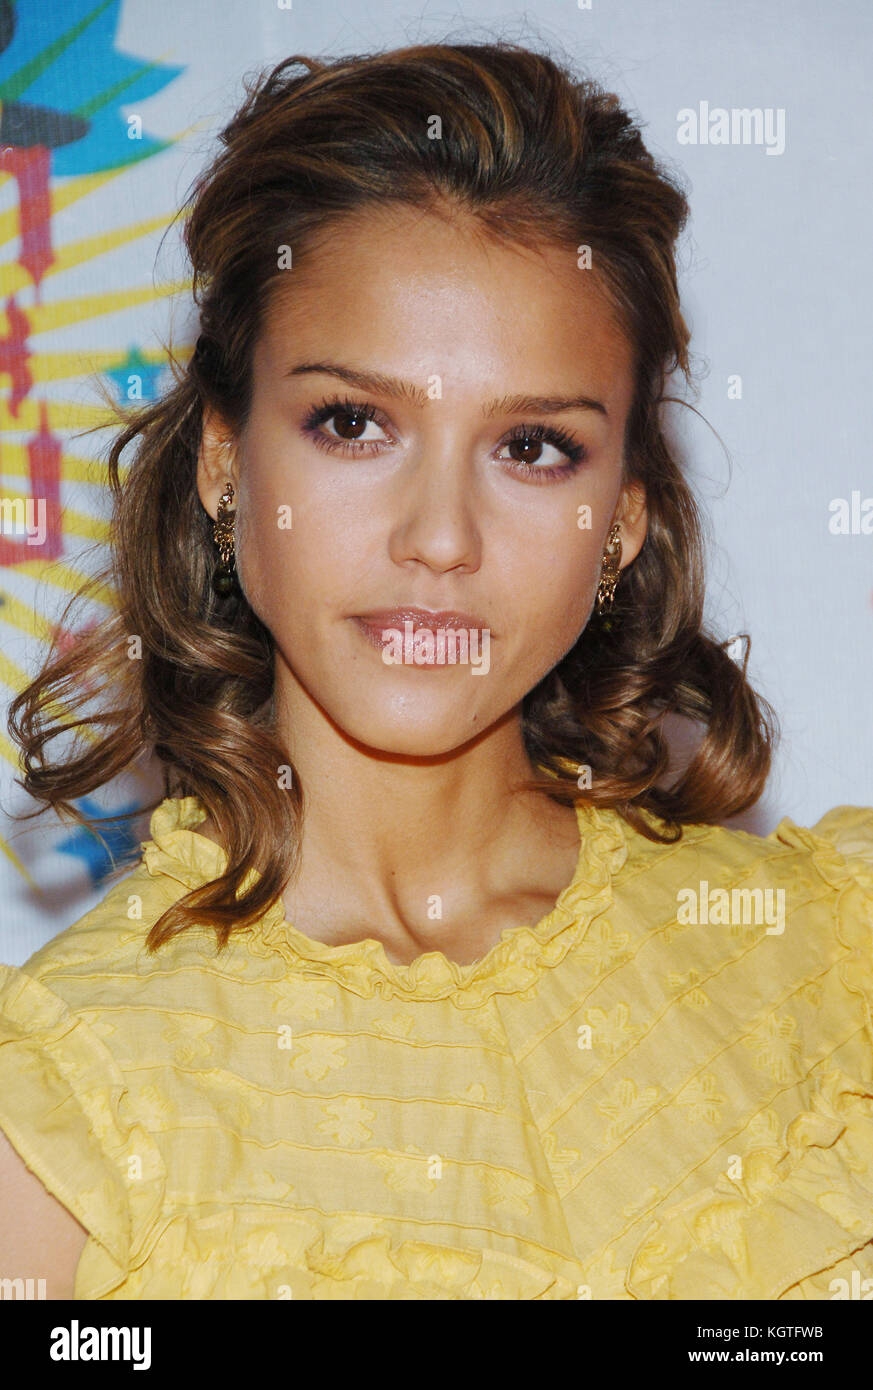 Jessica Alba = People, Headshot, Premiere, Awards show, Arrival, Red Carpet Event, Vertical, Smiling, Film Industry, USA, Movie actress, movie celebrity, Artist, Celebrity, Looking At Camera, Photography, Arts Culture and Entertainment, Attending an event, Bestof, One Person, fashion clothe Stock Photo